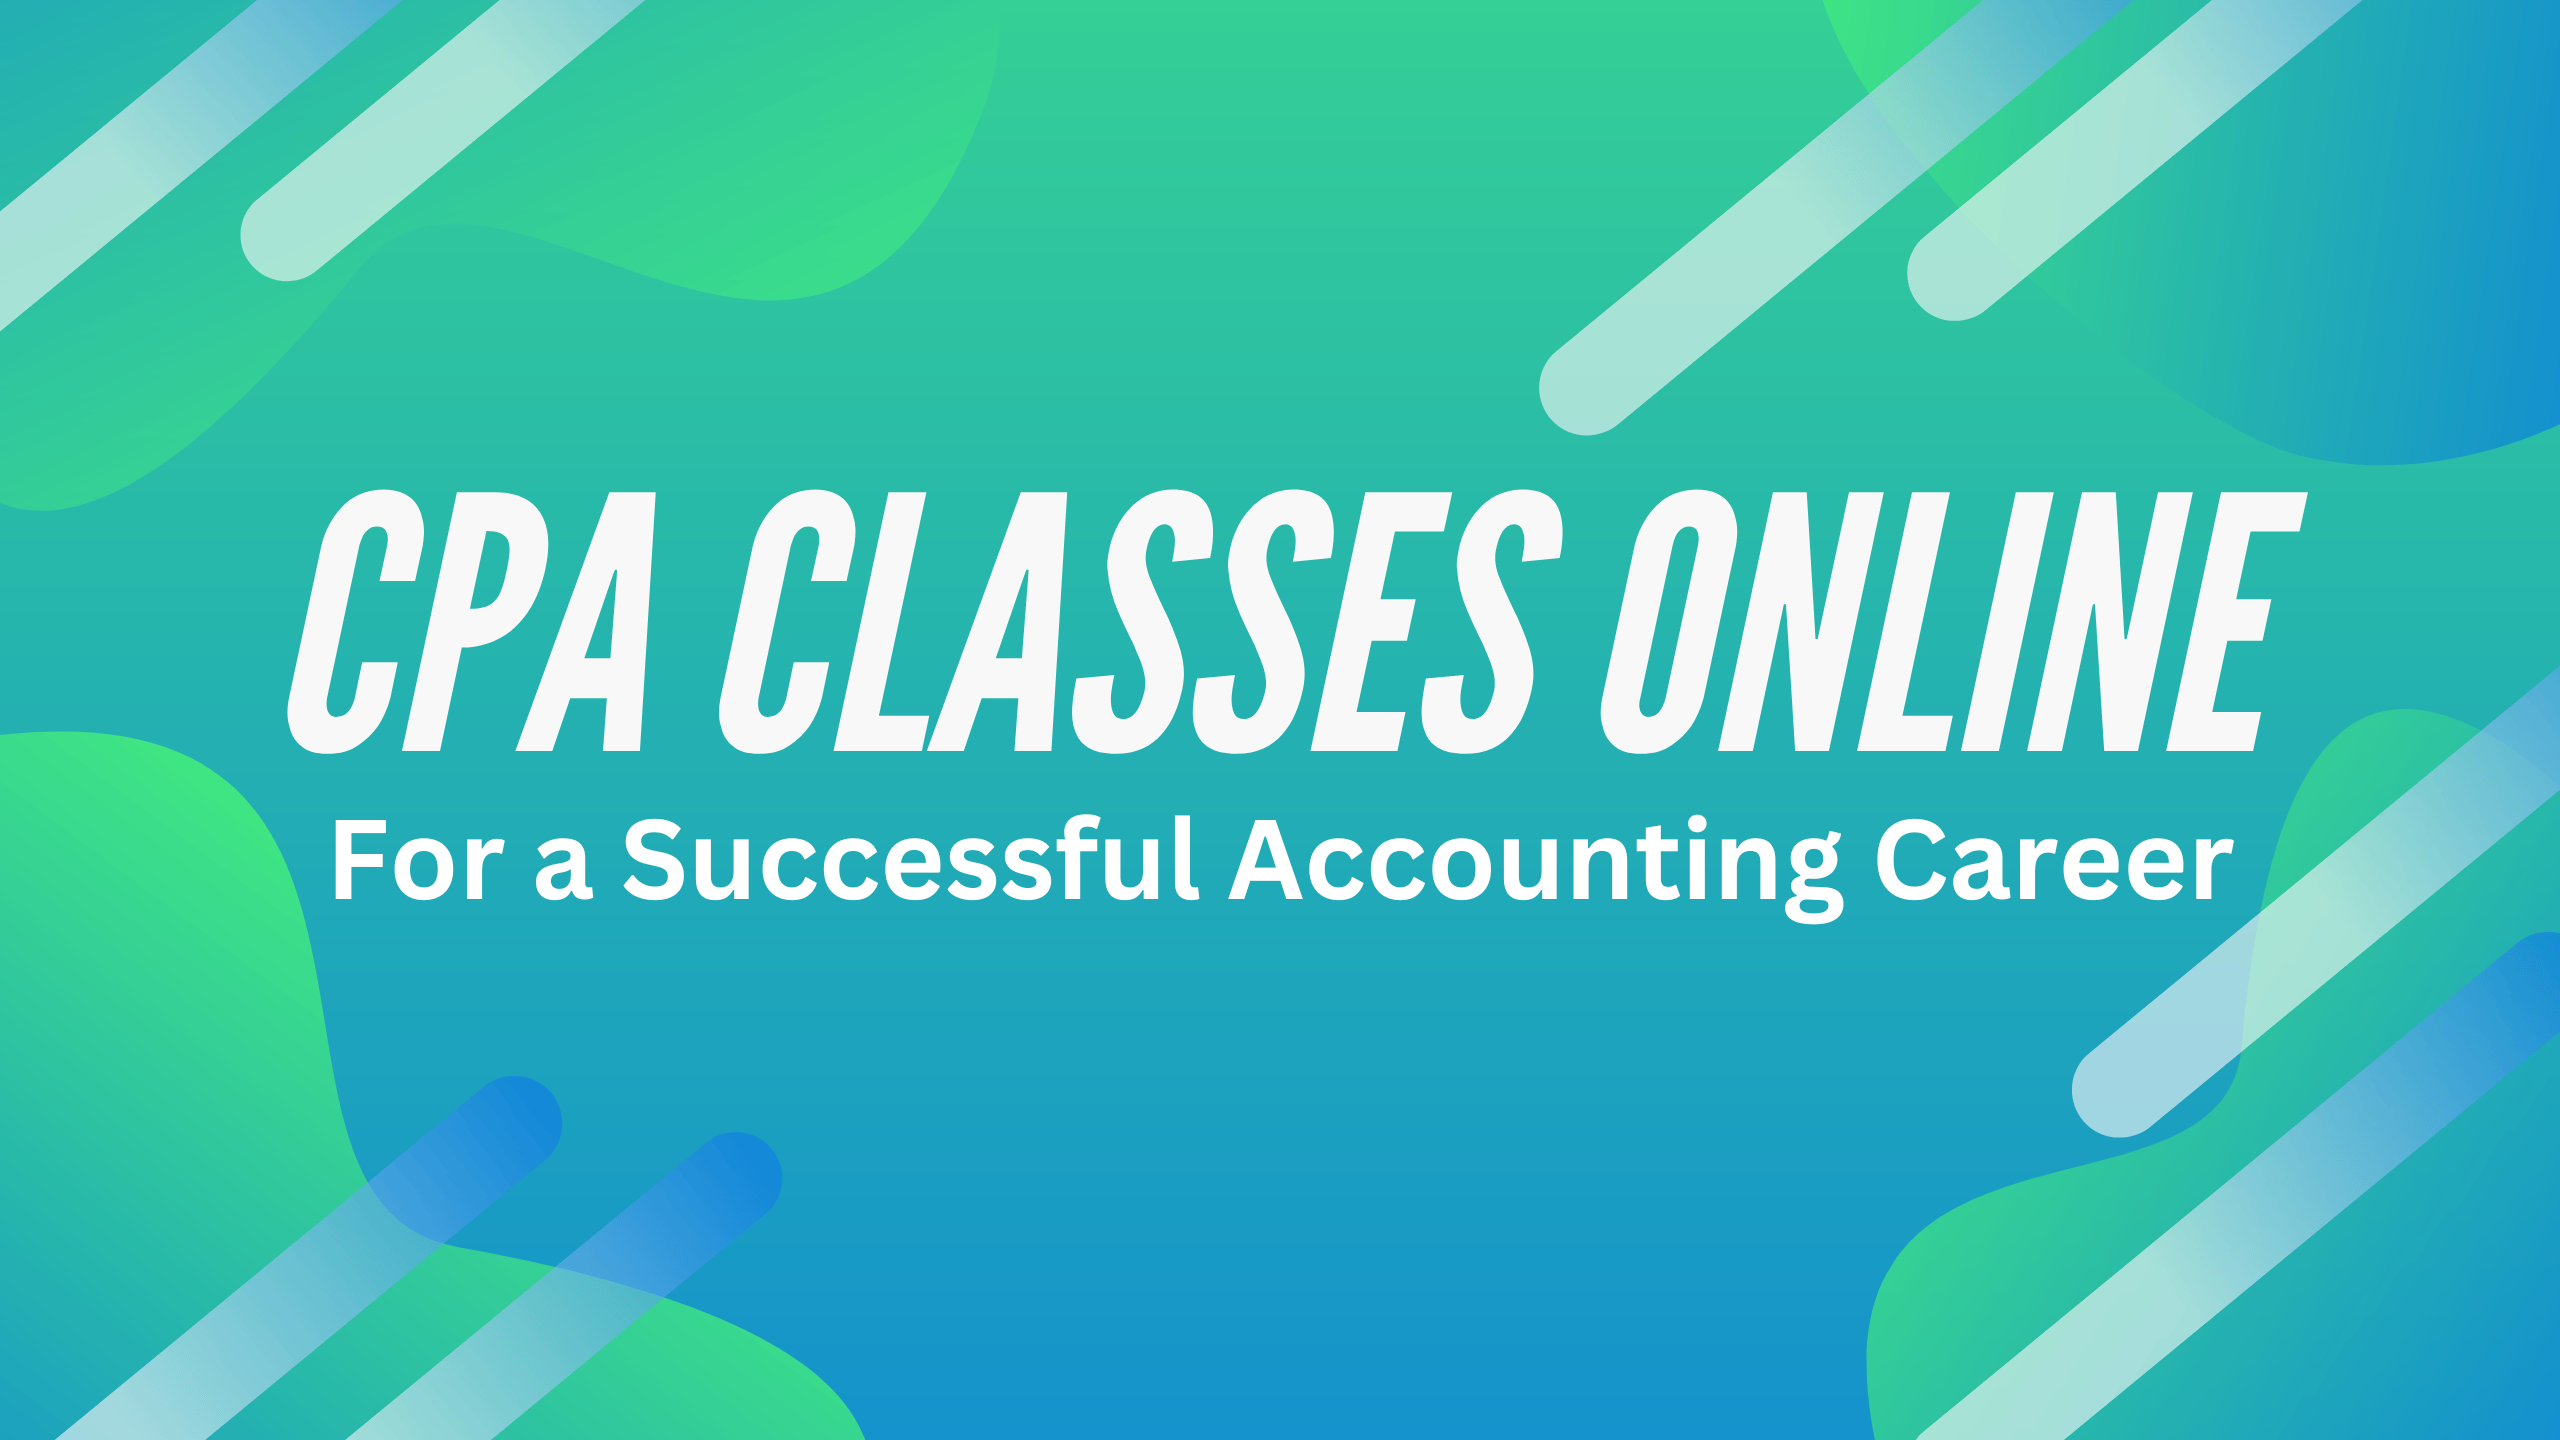 CPA Classes Online: For a Successful Accounting Career